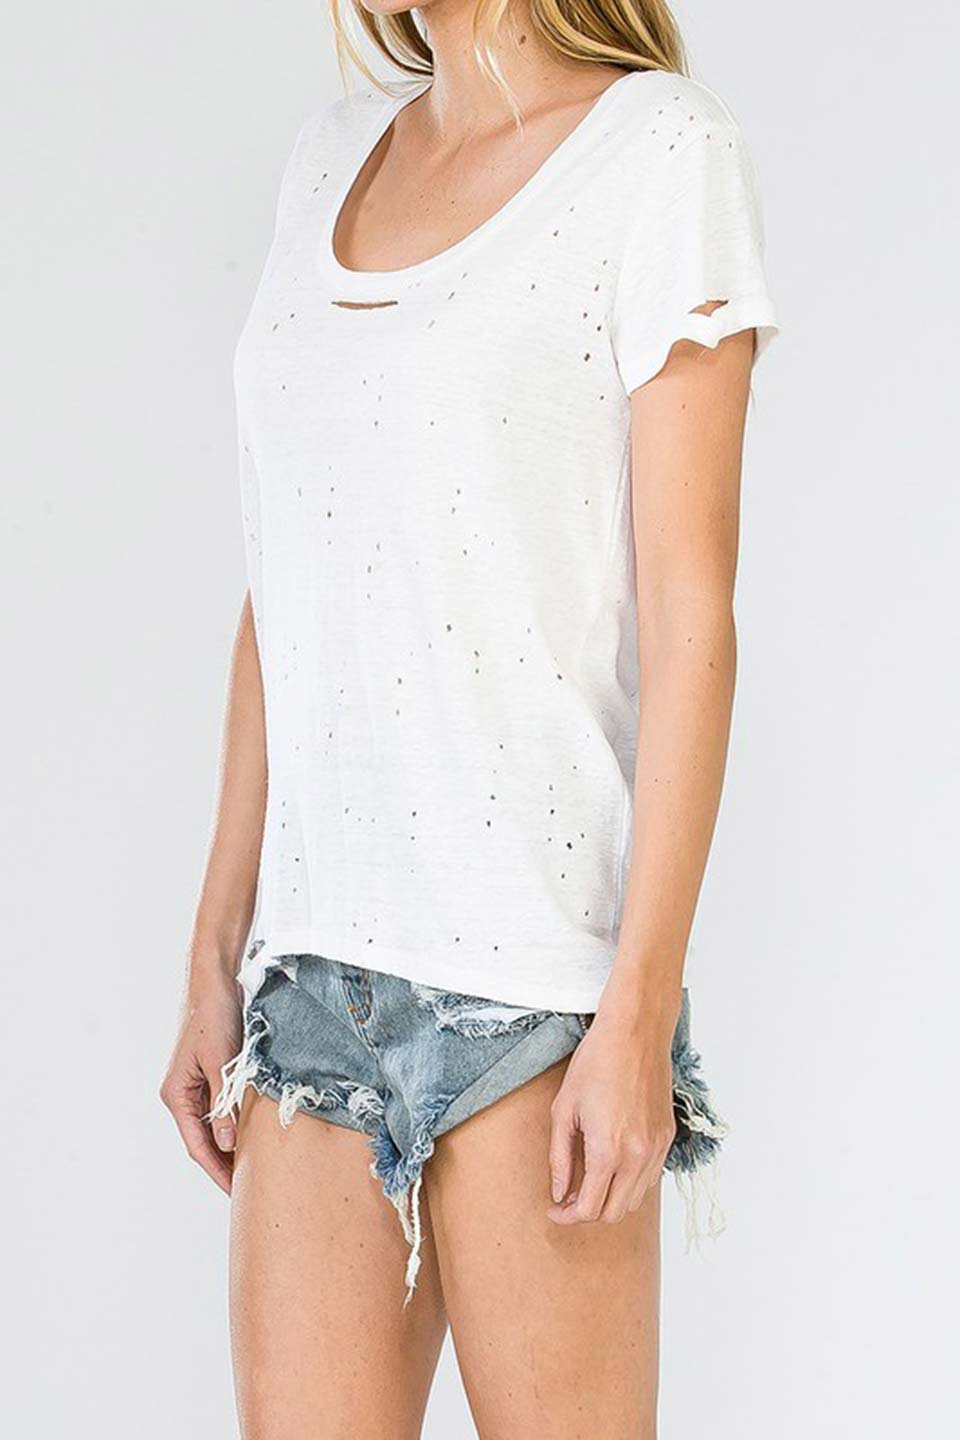 LA直輸入 / Distressed Scoop Neck Top / from L.A. / Tシャツ- 海外